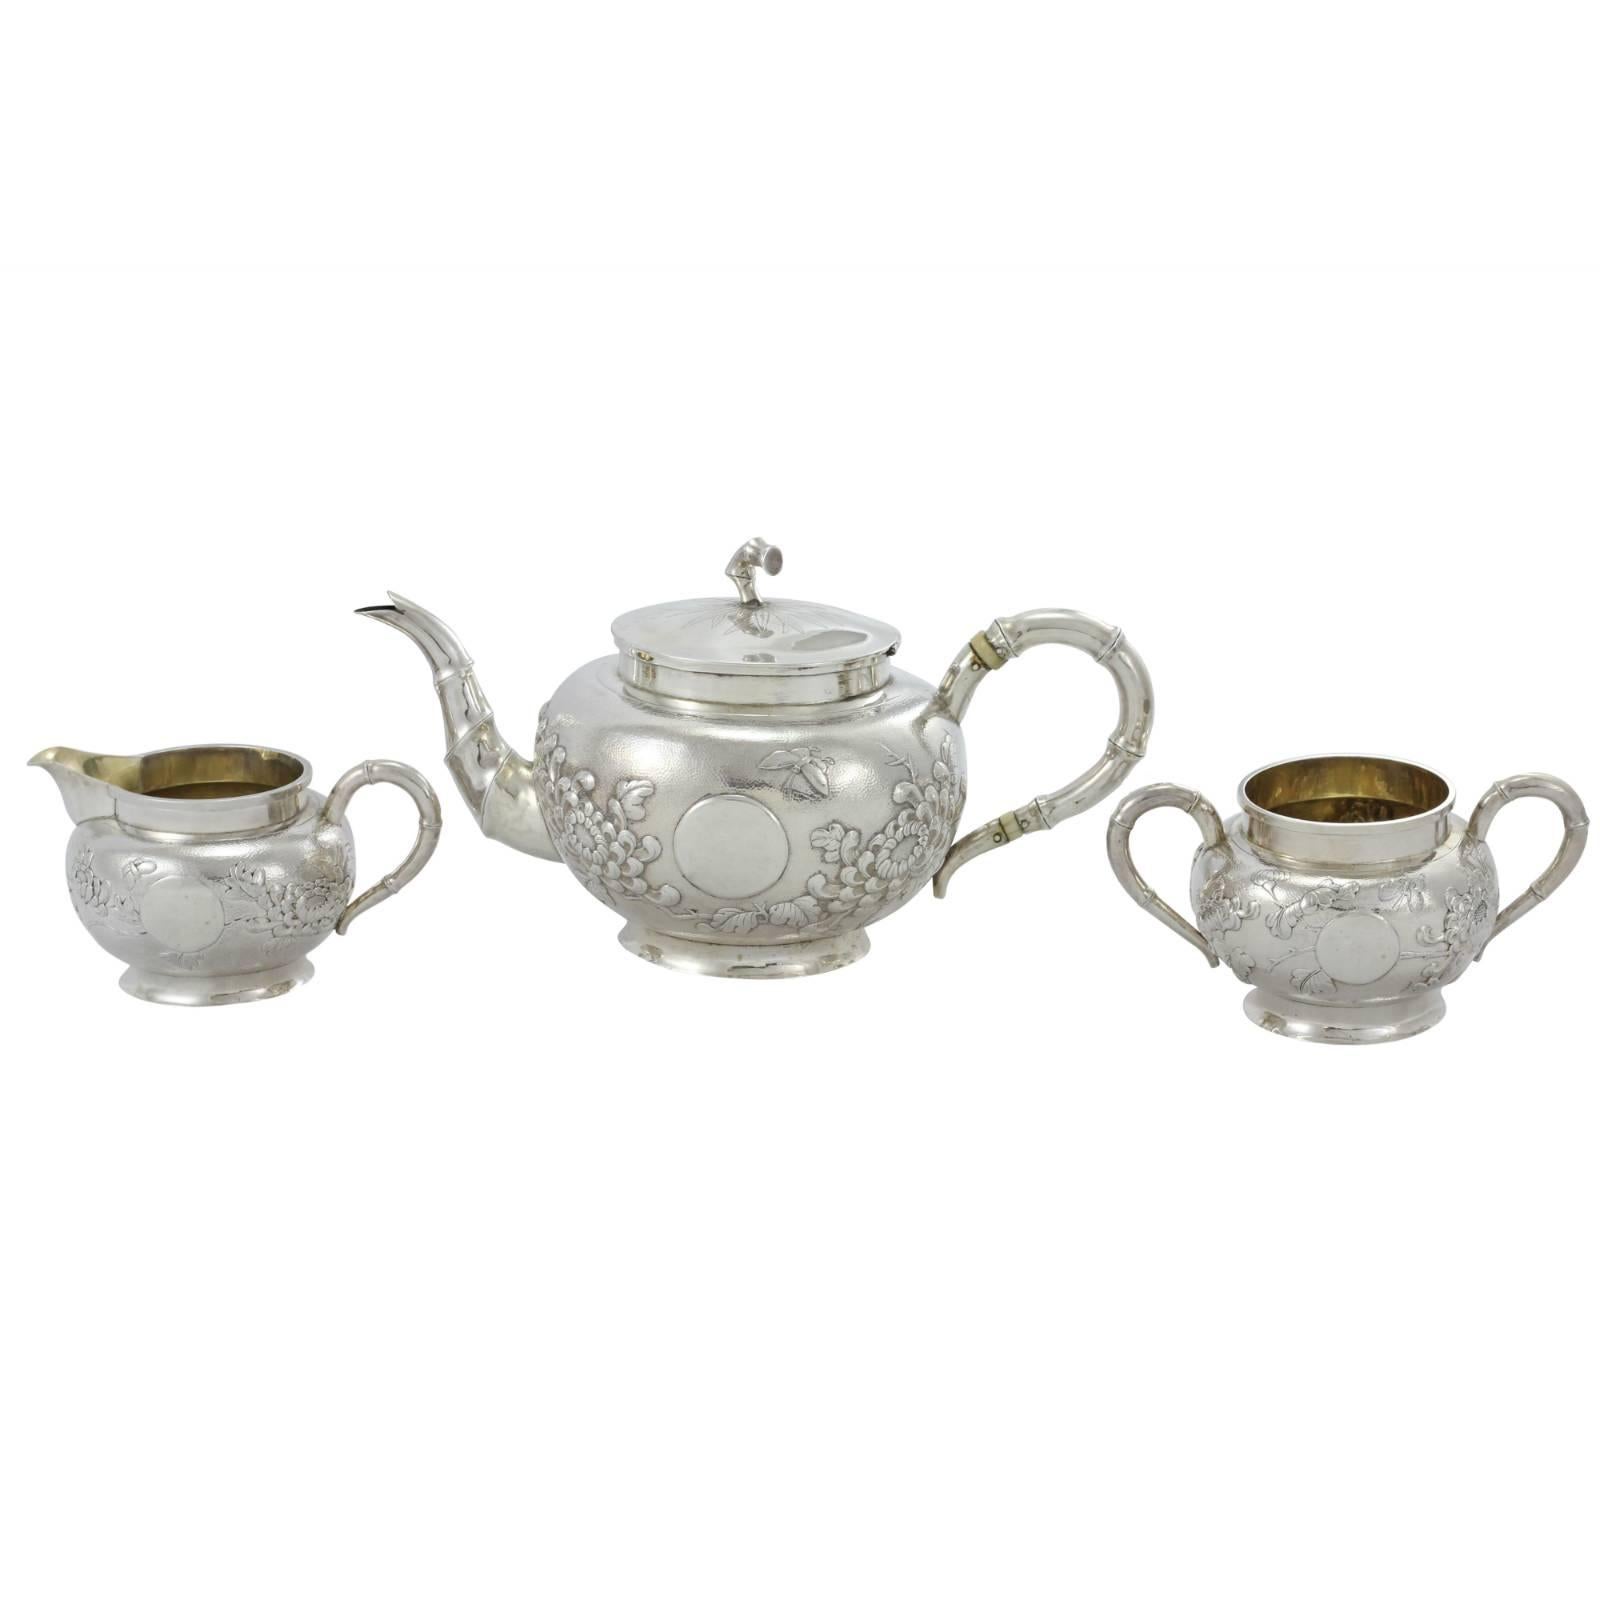 An early 20th century three-piece Chinese silver tea set, decorated with bamboo style handles, chrysanthemums, butterflies and pearls over a hand-hammered surface. Each individual piece has been marked '85', and 'LS', in reference to the purity, and